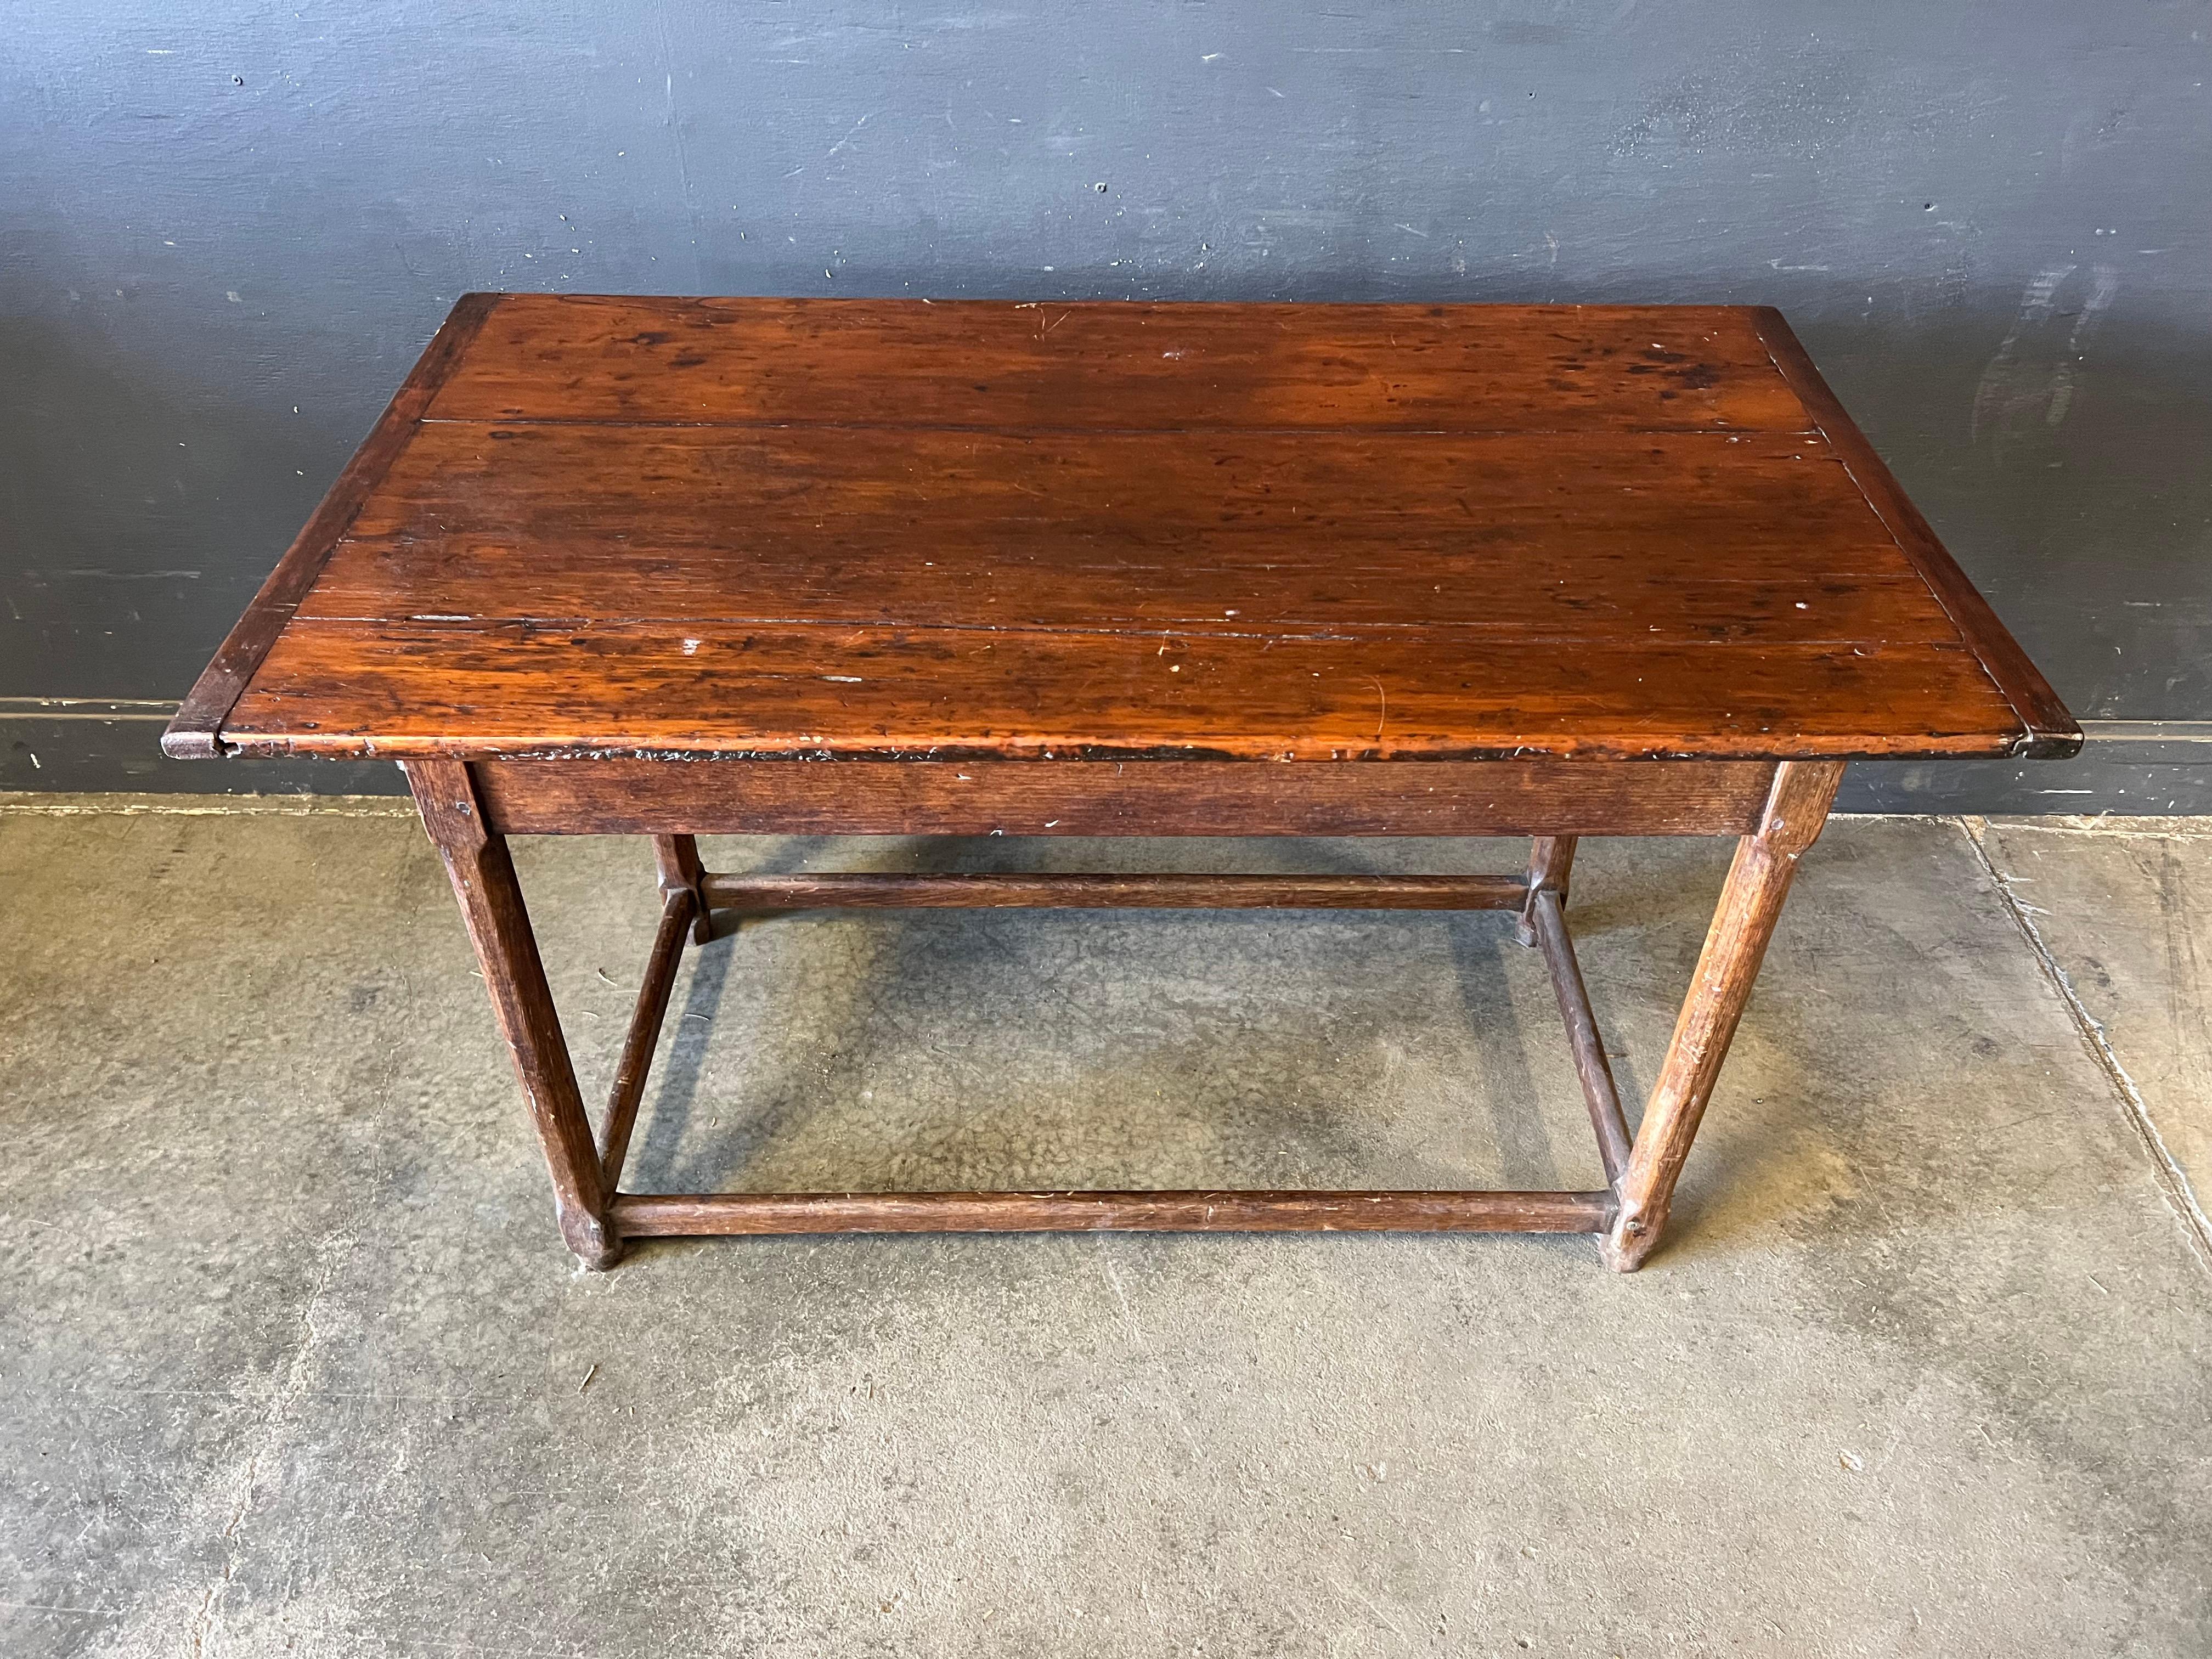 19th Century Hudson Vally Country Table or Desk with Drawers and Stretchers For Sale 4